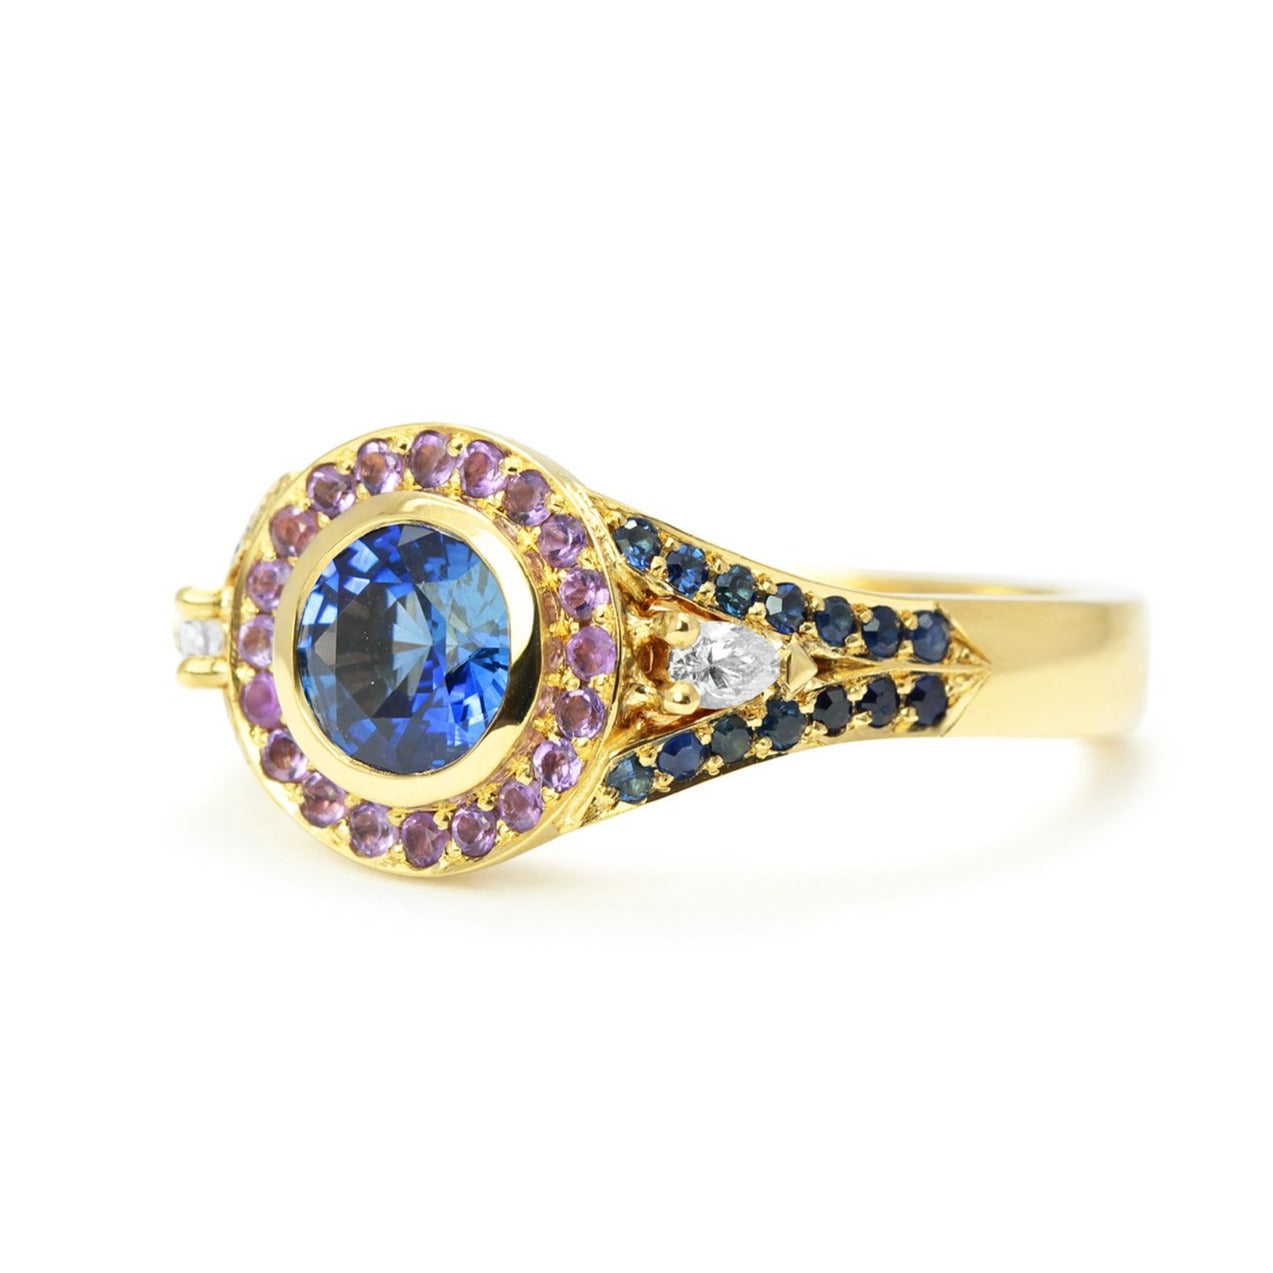 Bespoke Laura engagement ring with a 0.9ct blue Sri Lankan sapphire, blue Australian sapphires, pear-cut conflict-free African diamonds, fair-traded amethyst and 18ct yellow Fairtrade Gold 